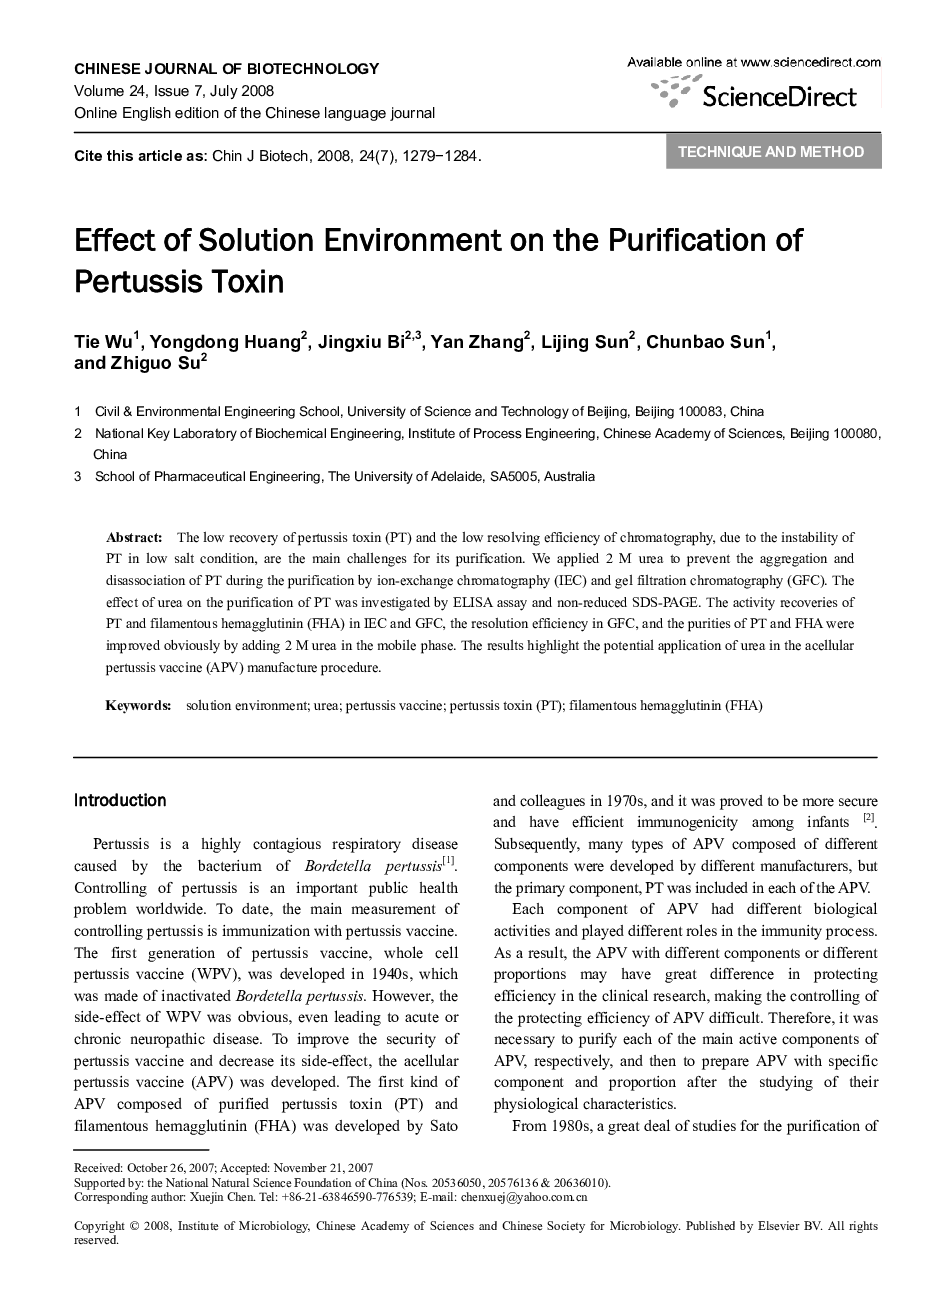 Effect of Solution Environment on the Purification of Pertussis Toxin